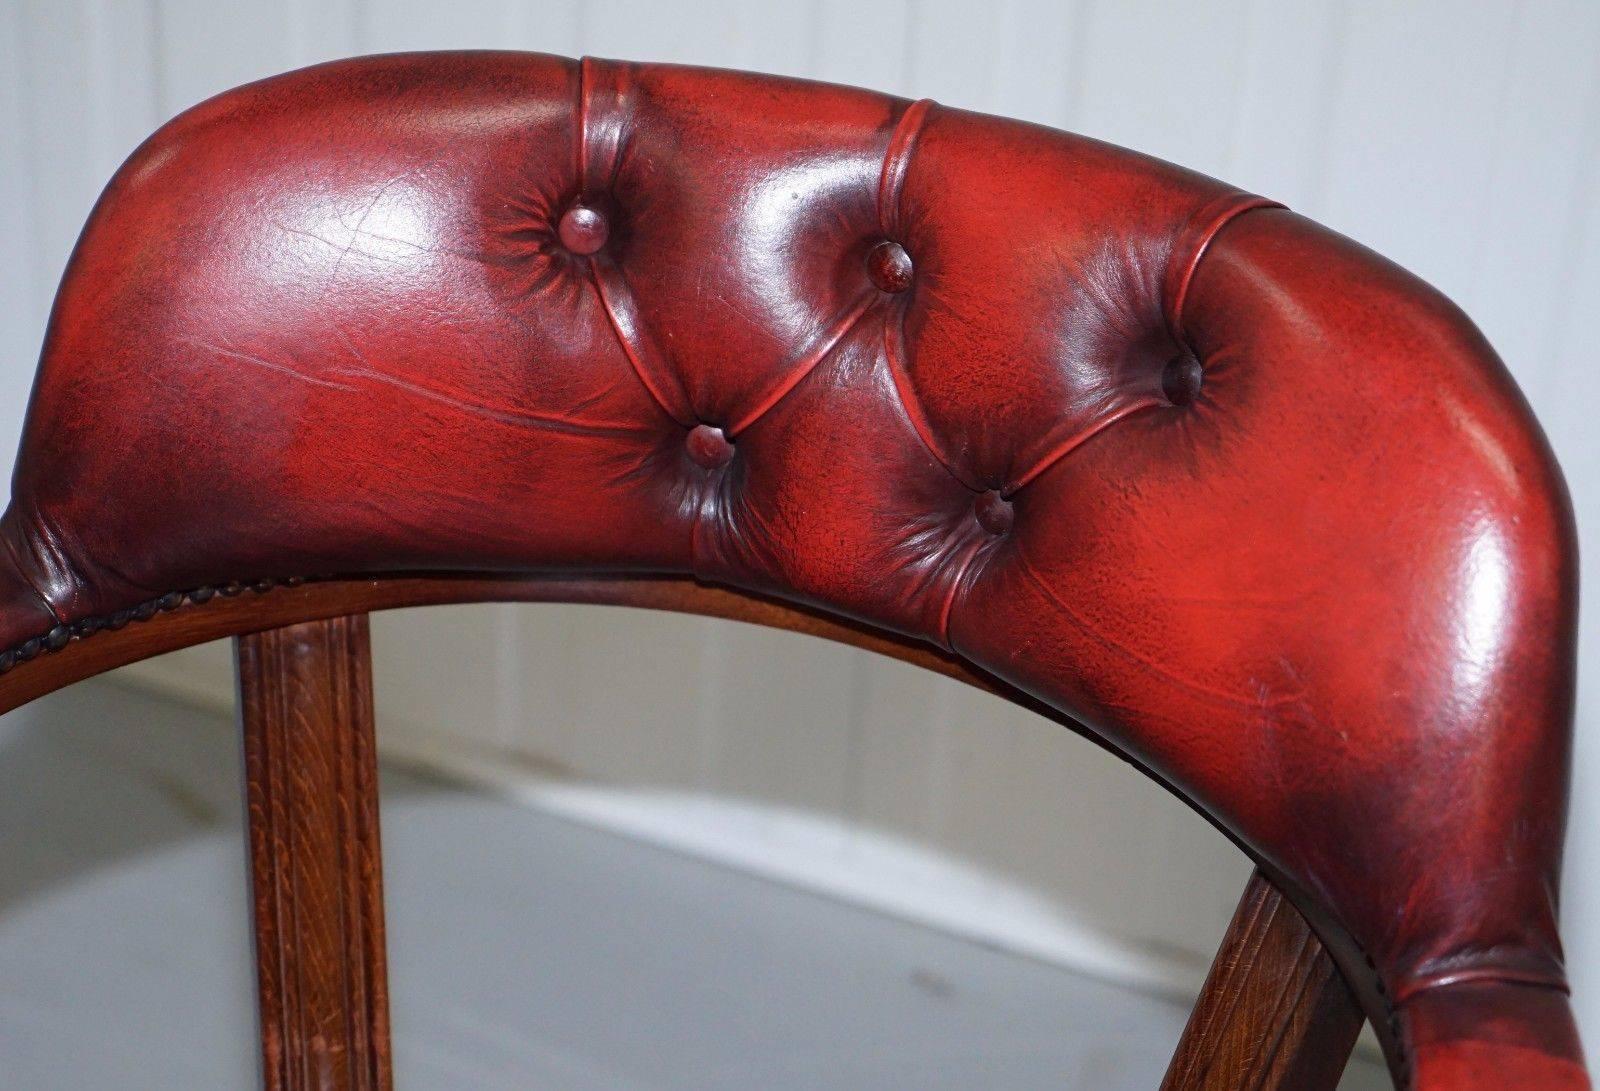 British Lovely Oxblood Leather Chesterfield Court Chair for Desks or Guests Lovely Find